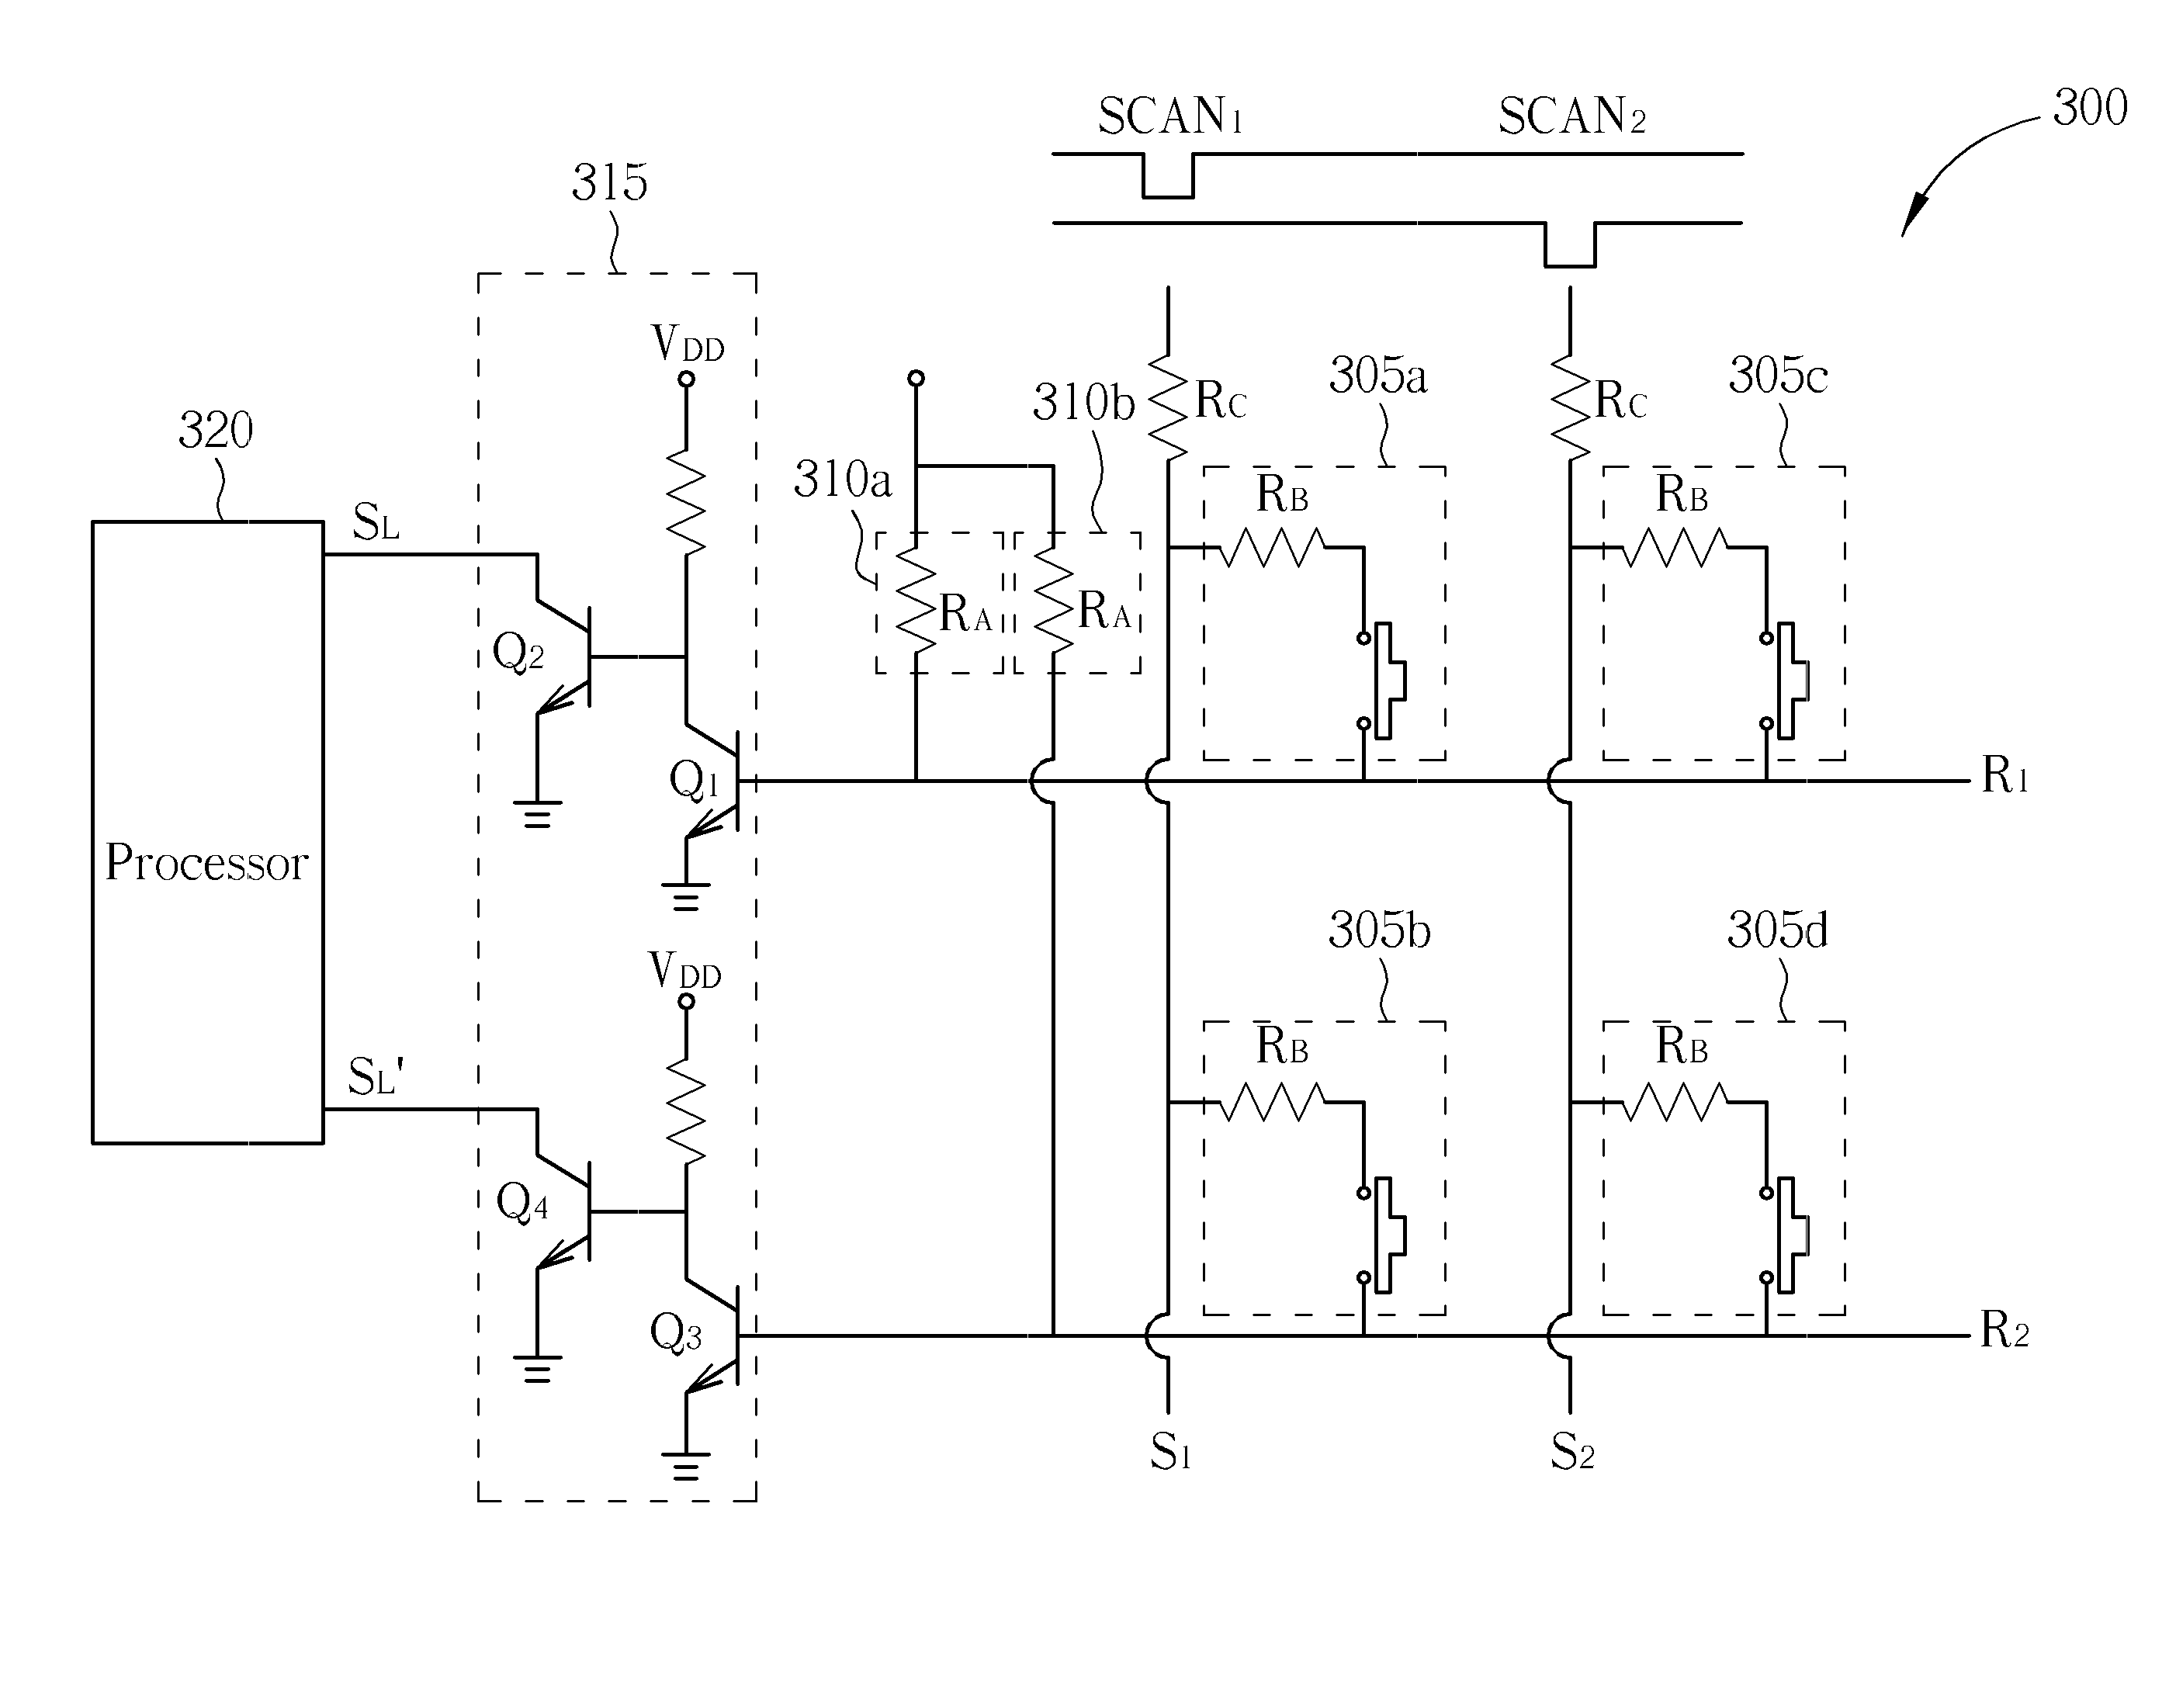 Ghost key detecting circuit and related method